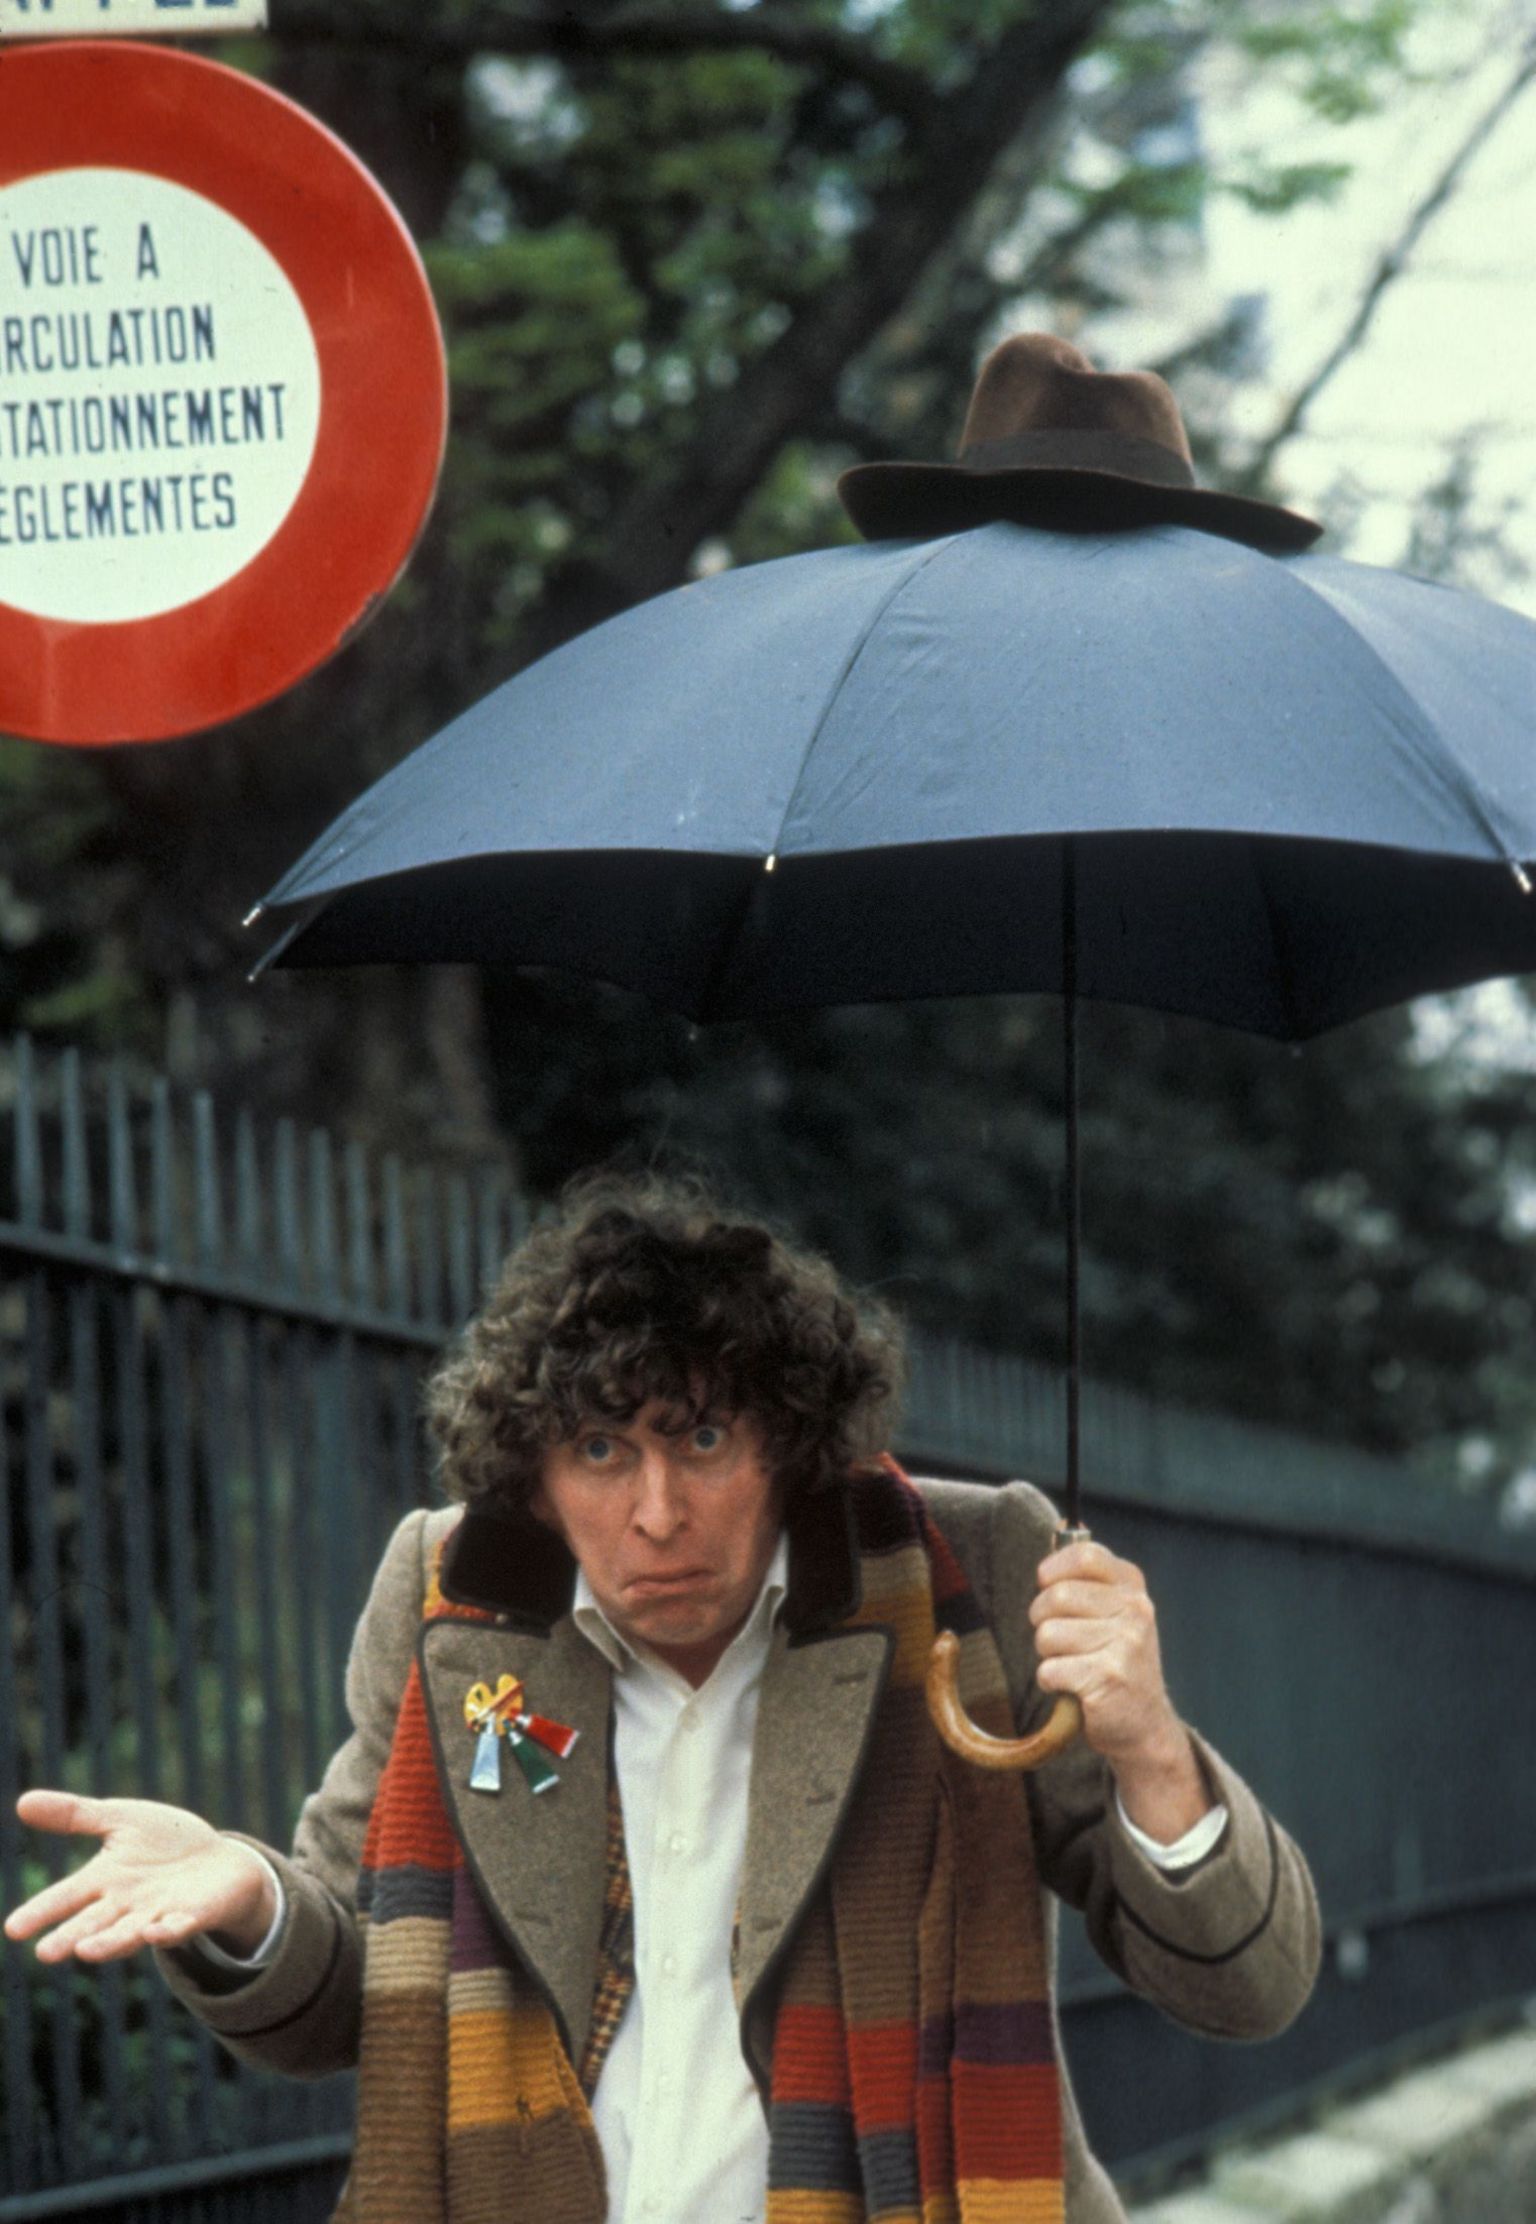 Tom Baker in costume as the 4th Doctor, shrugging his shoulders and carrying an umbrella with the Doctor's hat on top